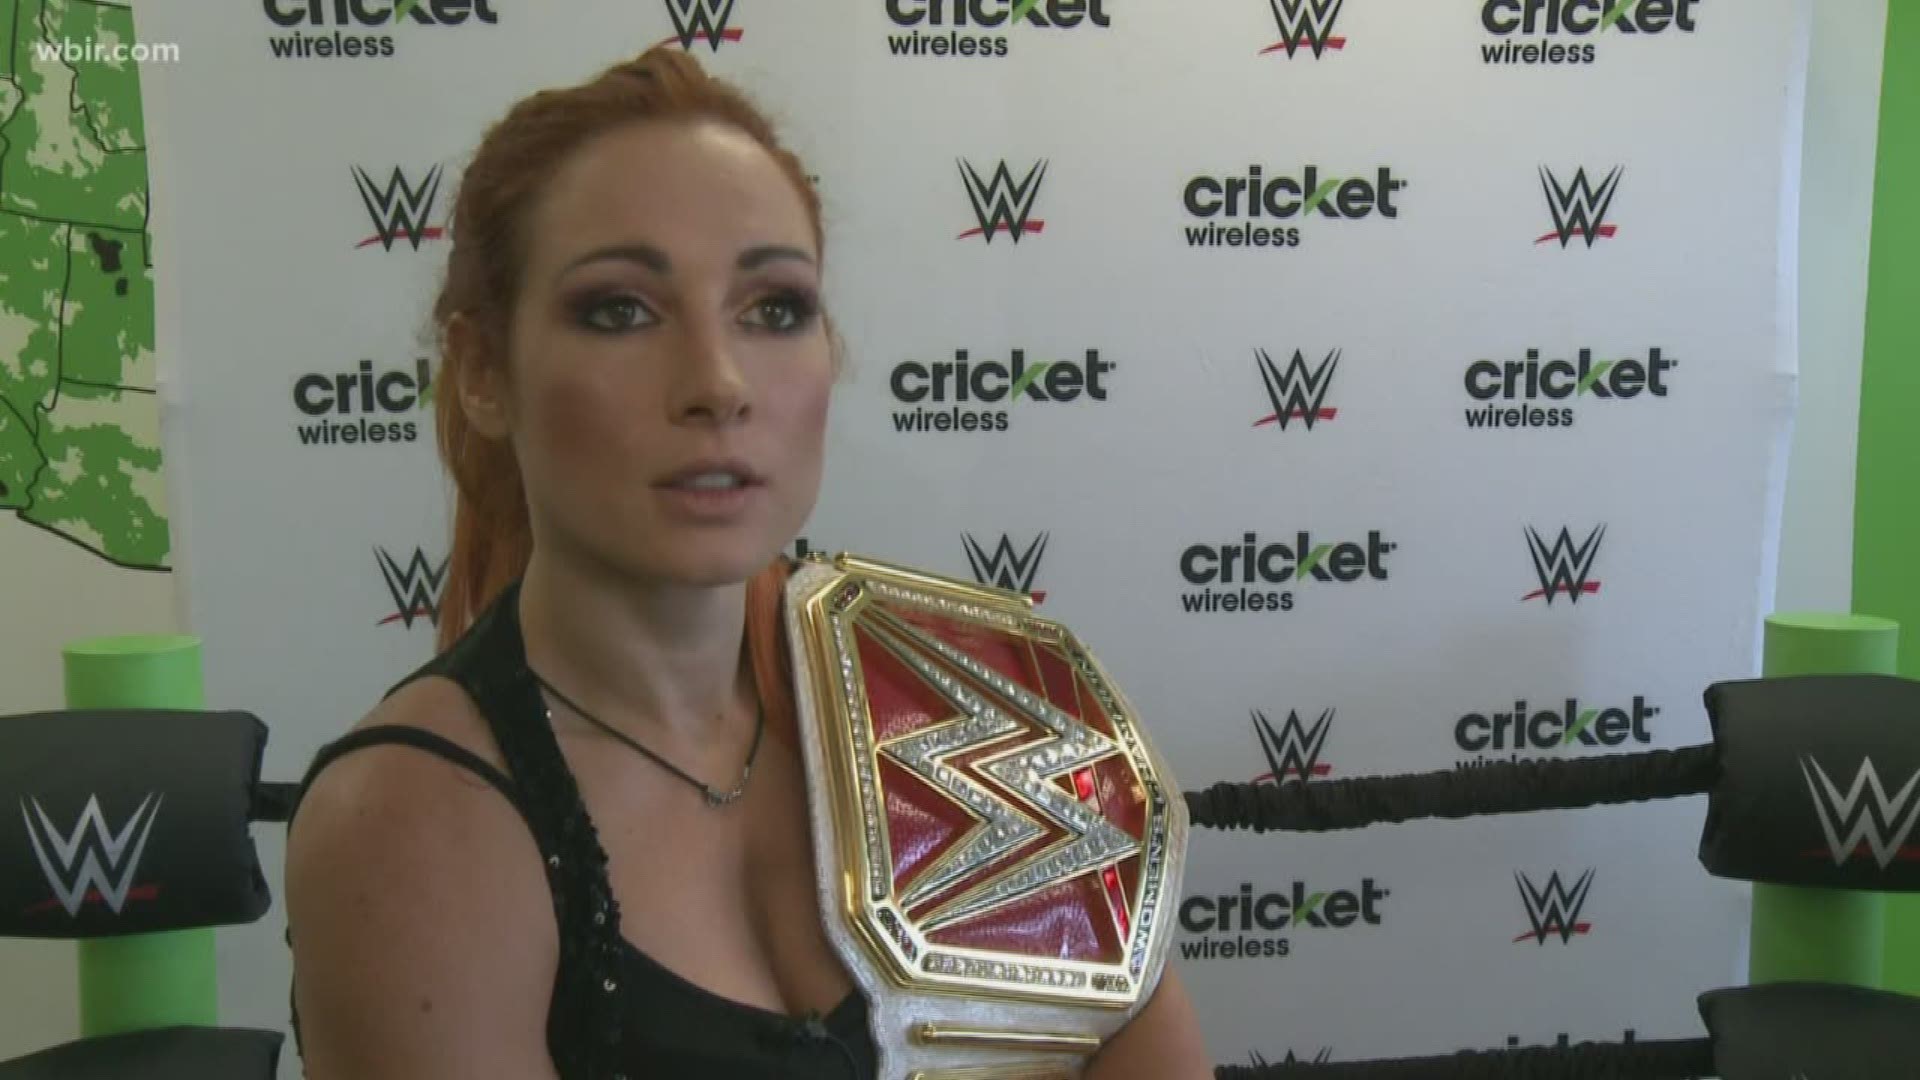 Fans began lining up at 5:00 a.m. at the Cricket Wireless Store on Chapman Highway to meet WWE Raw Women's Champion, "The Man", Becky Lynch. Sept. 16, 2019-4pm.